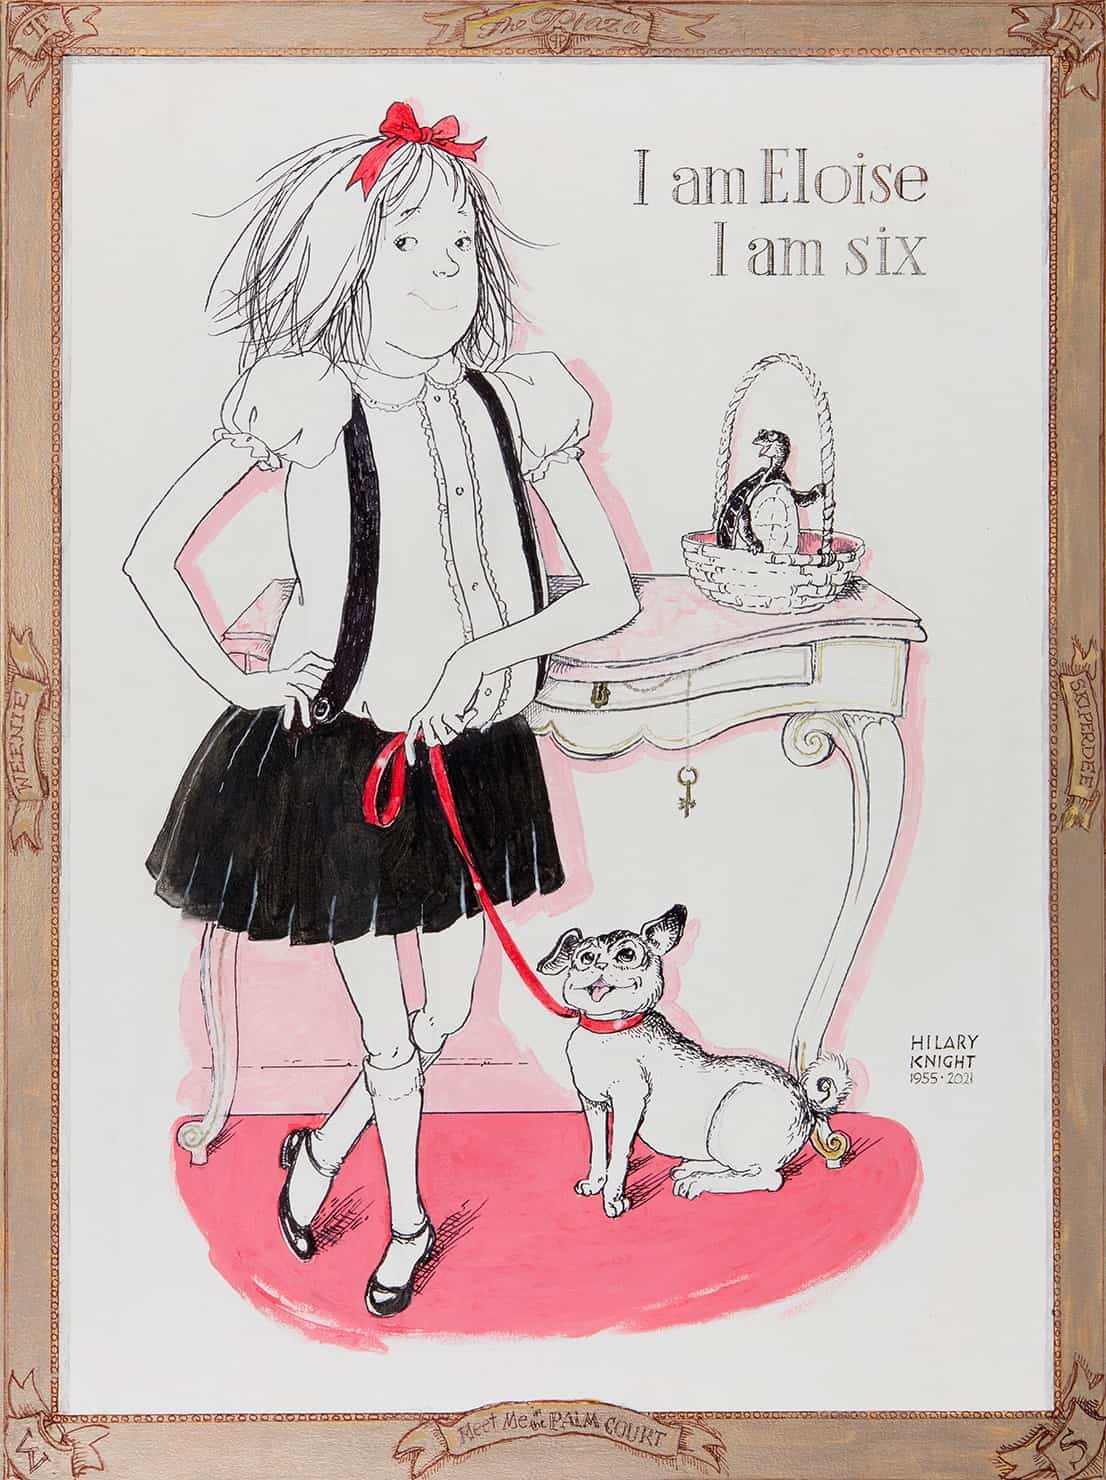 Eloise in the books by Kay Thompson — the indomitable six-year-old girl who lives in the Plaza Hotel, stands with her dog in Hilary Knight's illustration.Press image courtesy of the Norman Rockwell Museum